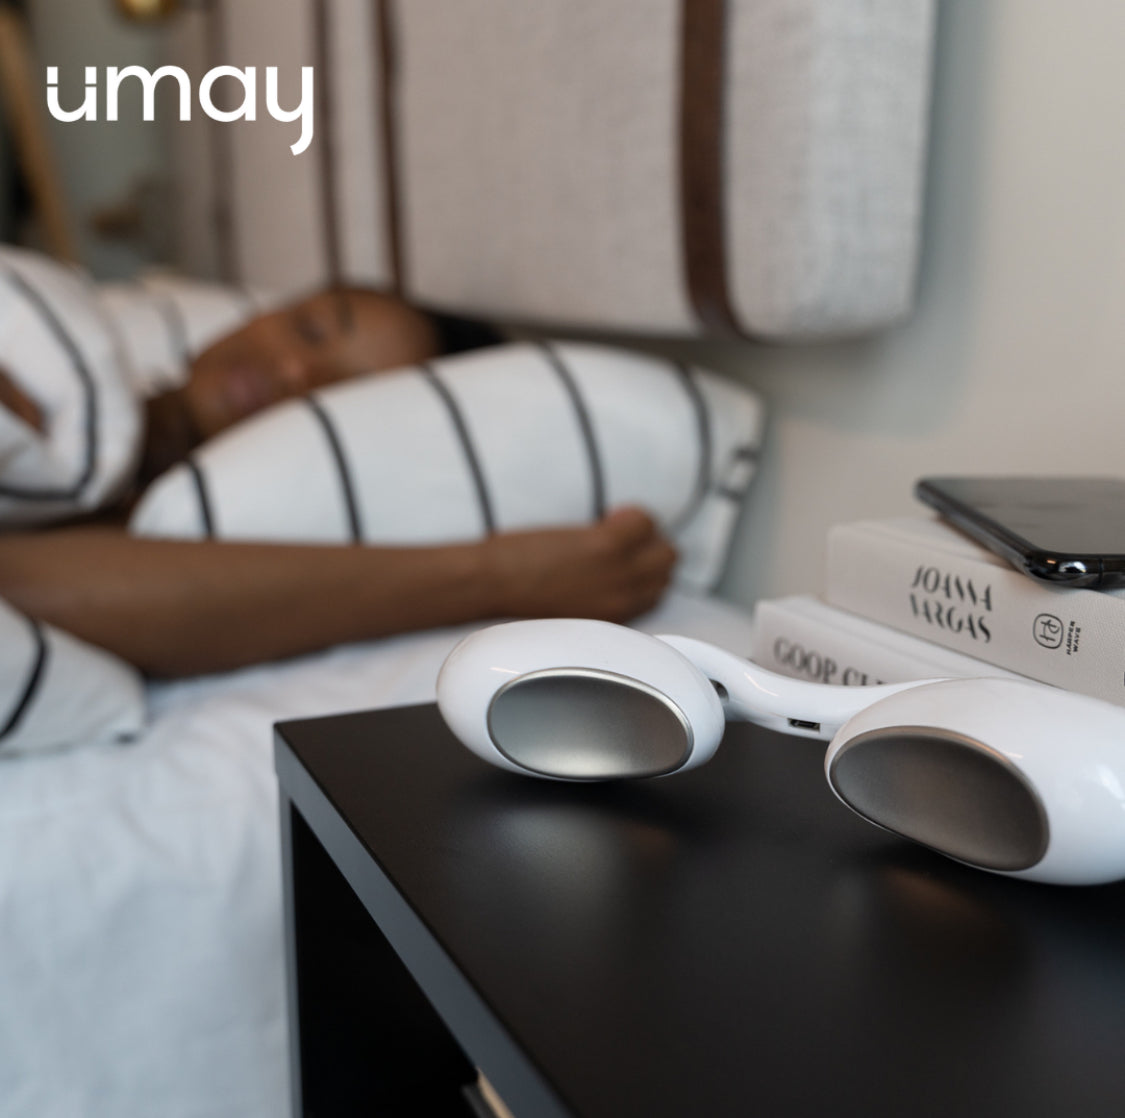 Ümay‘s REST Device for digital rest & recovery